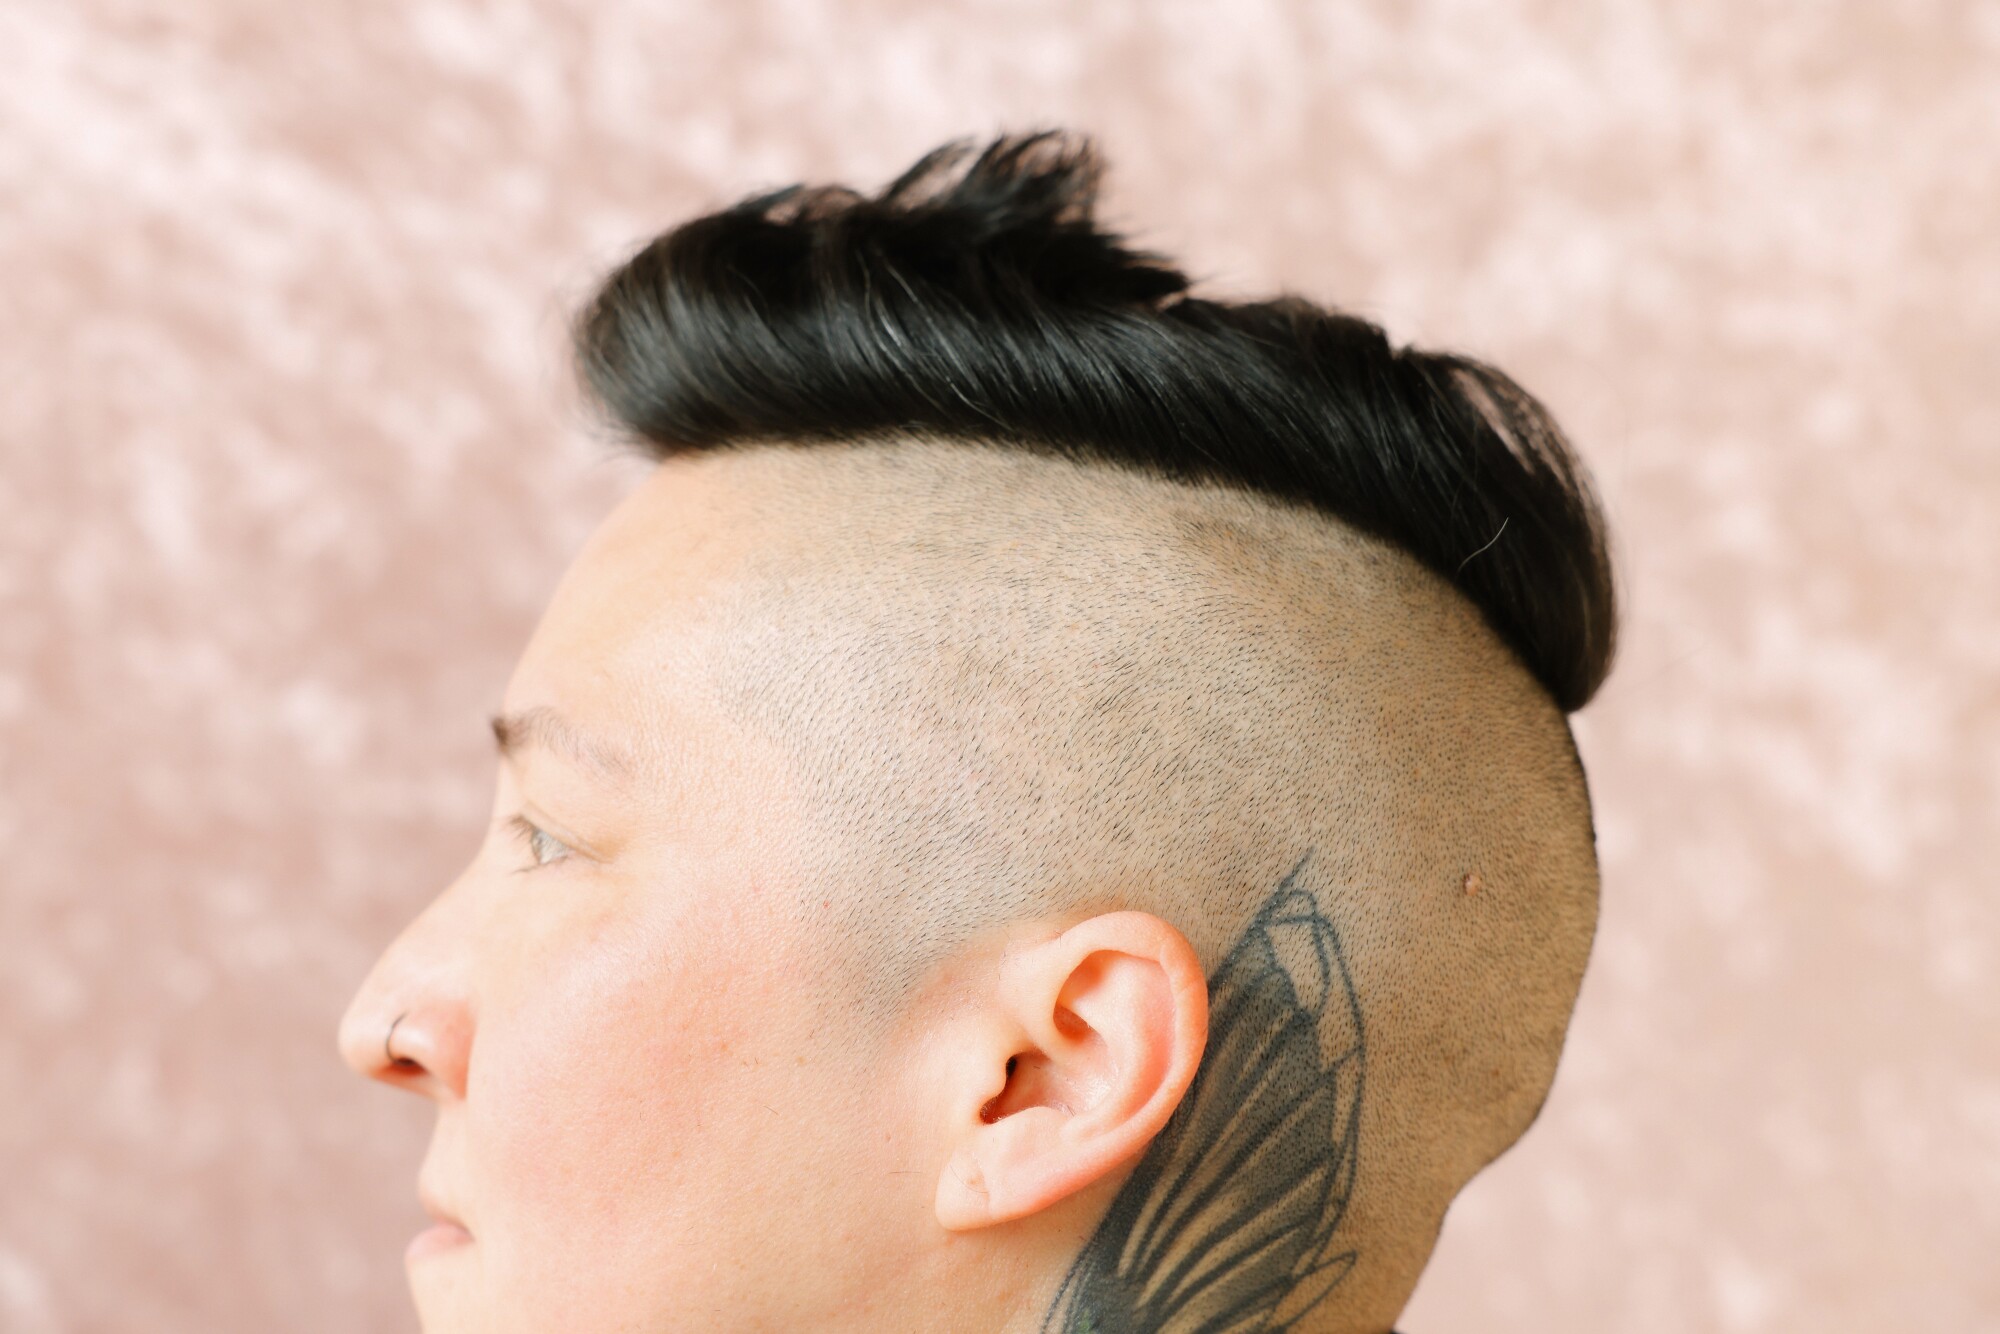 A person has shaved hair on the side of his head, has long hair on top and a tattoo near the ear